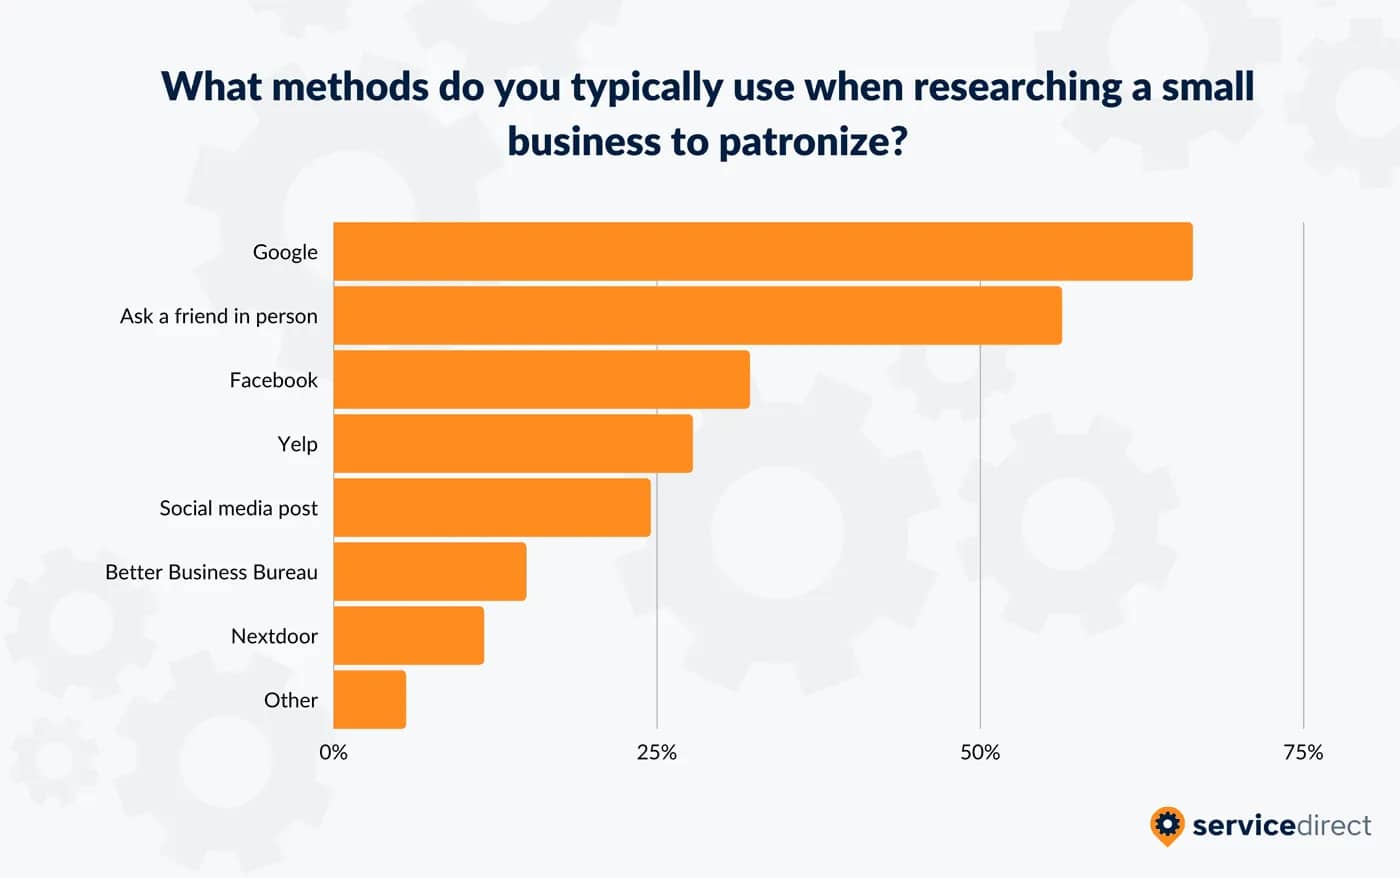 66% of consumers use Google when researching a small business to patronize.